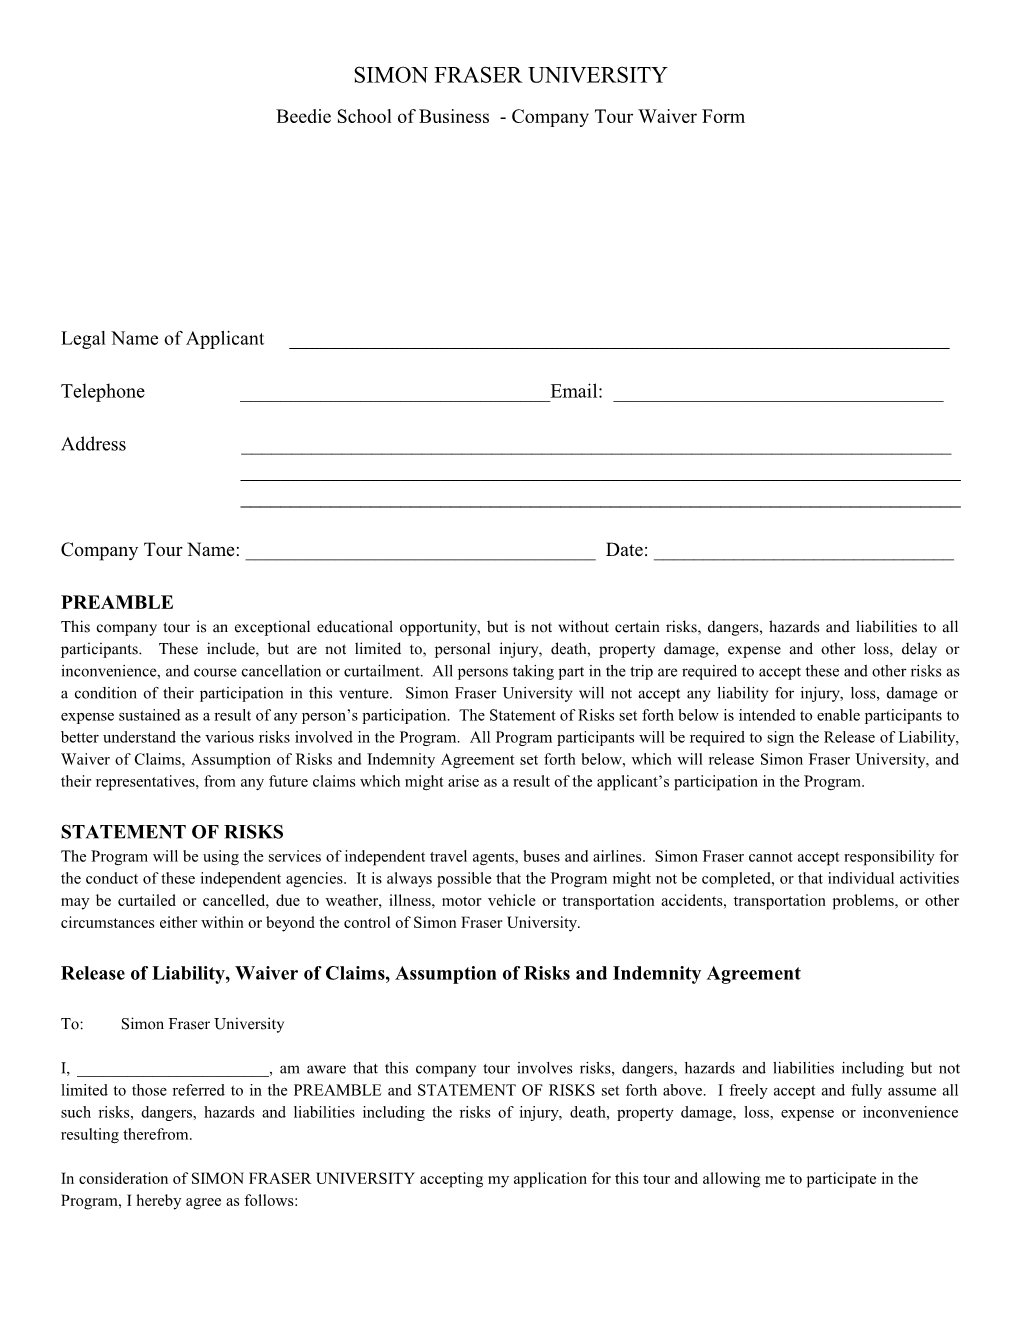 Beedie School of Business - Company Tour Waiver Form